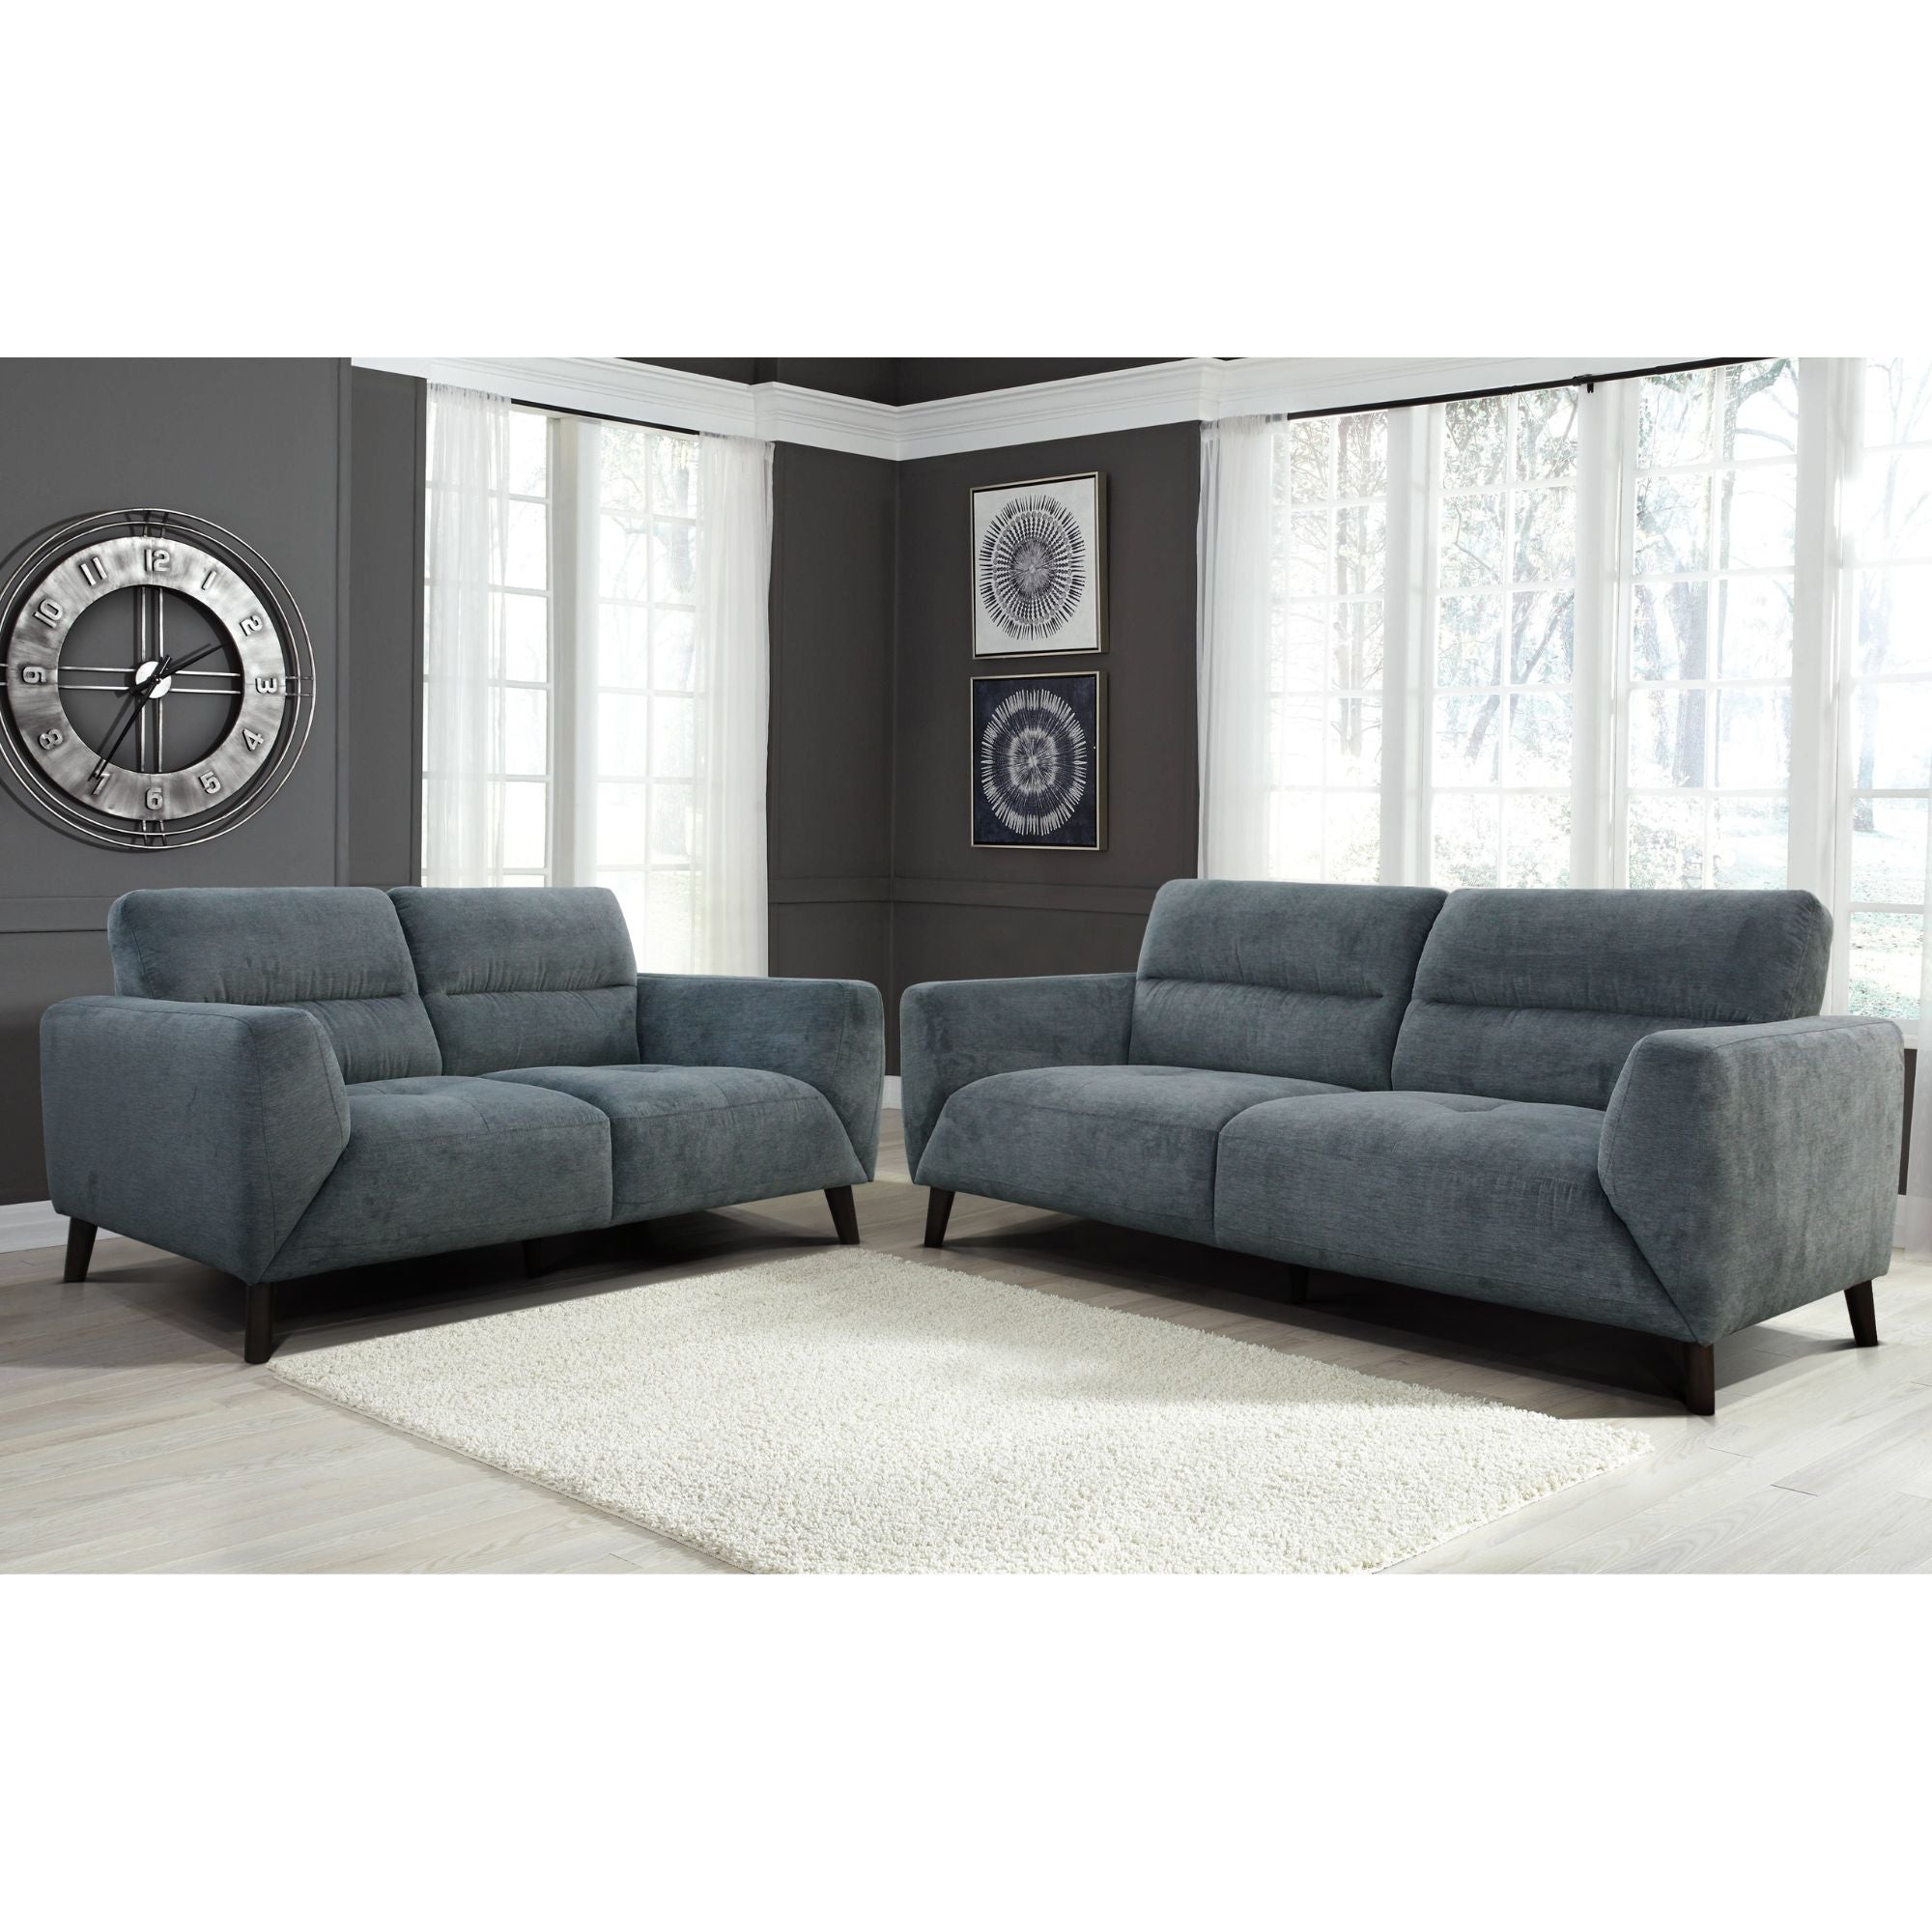 Monarch 2 Seater Sofa Fabric Uplholstered Lounge Couch - Charcoal.